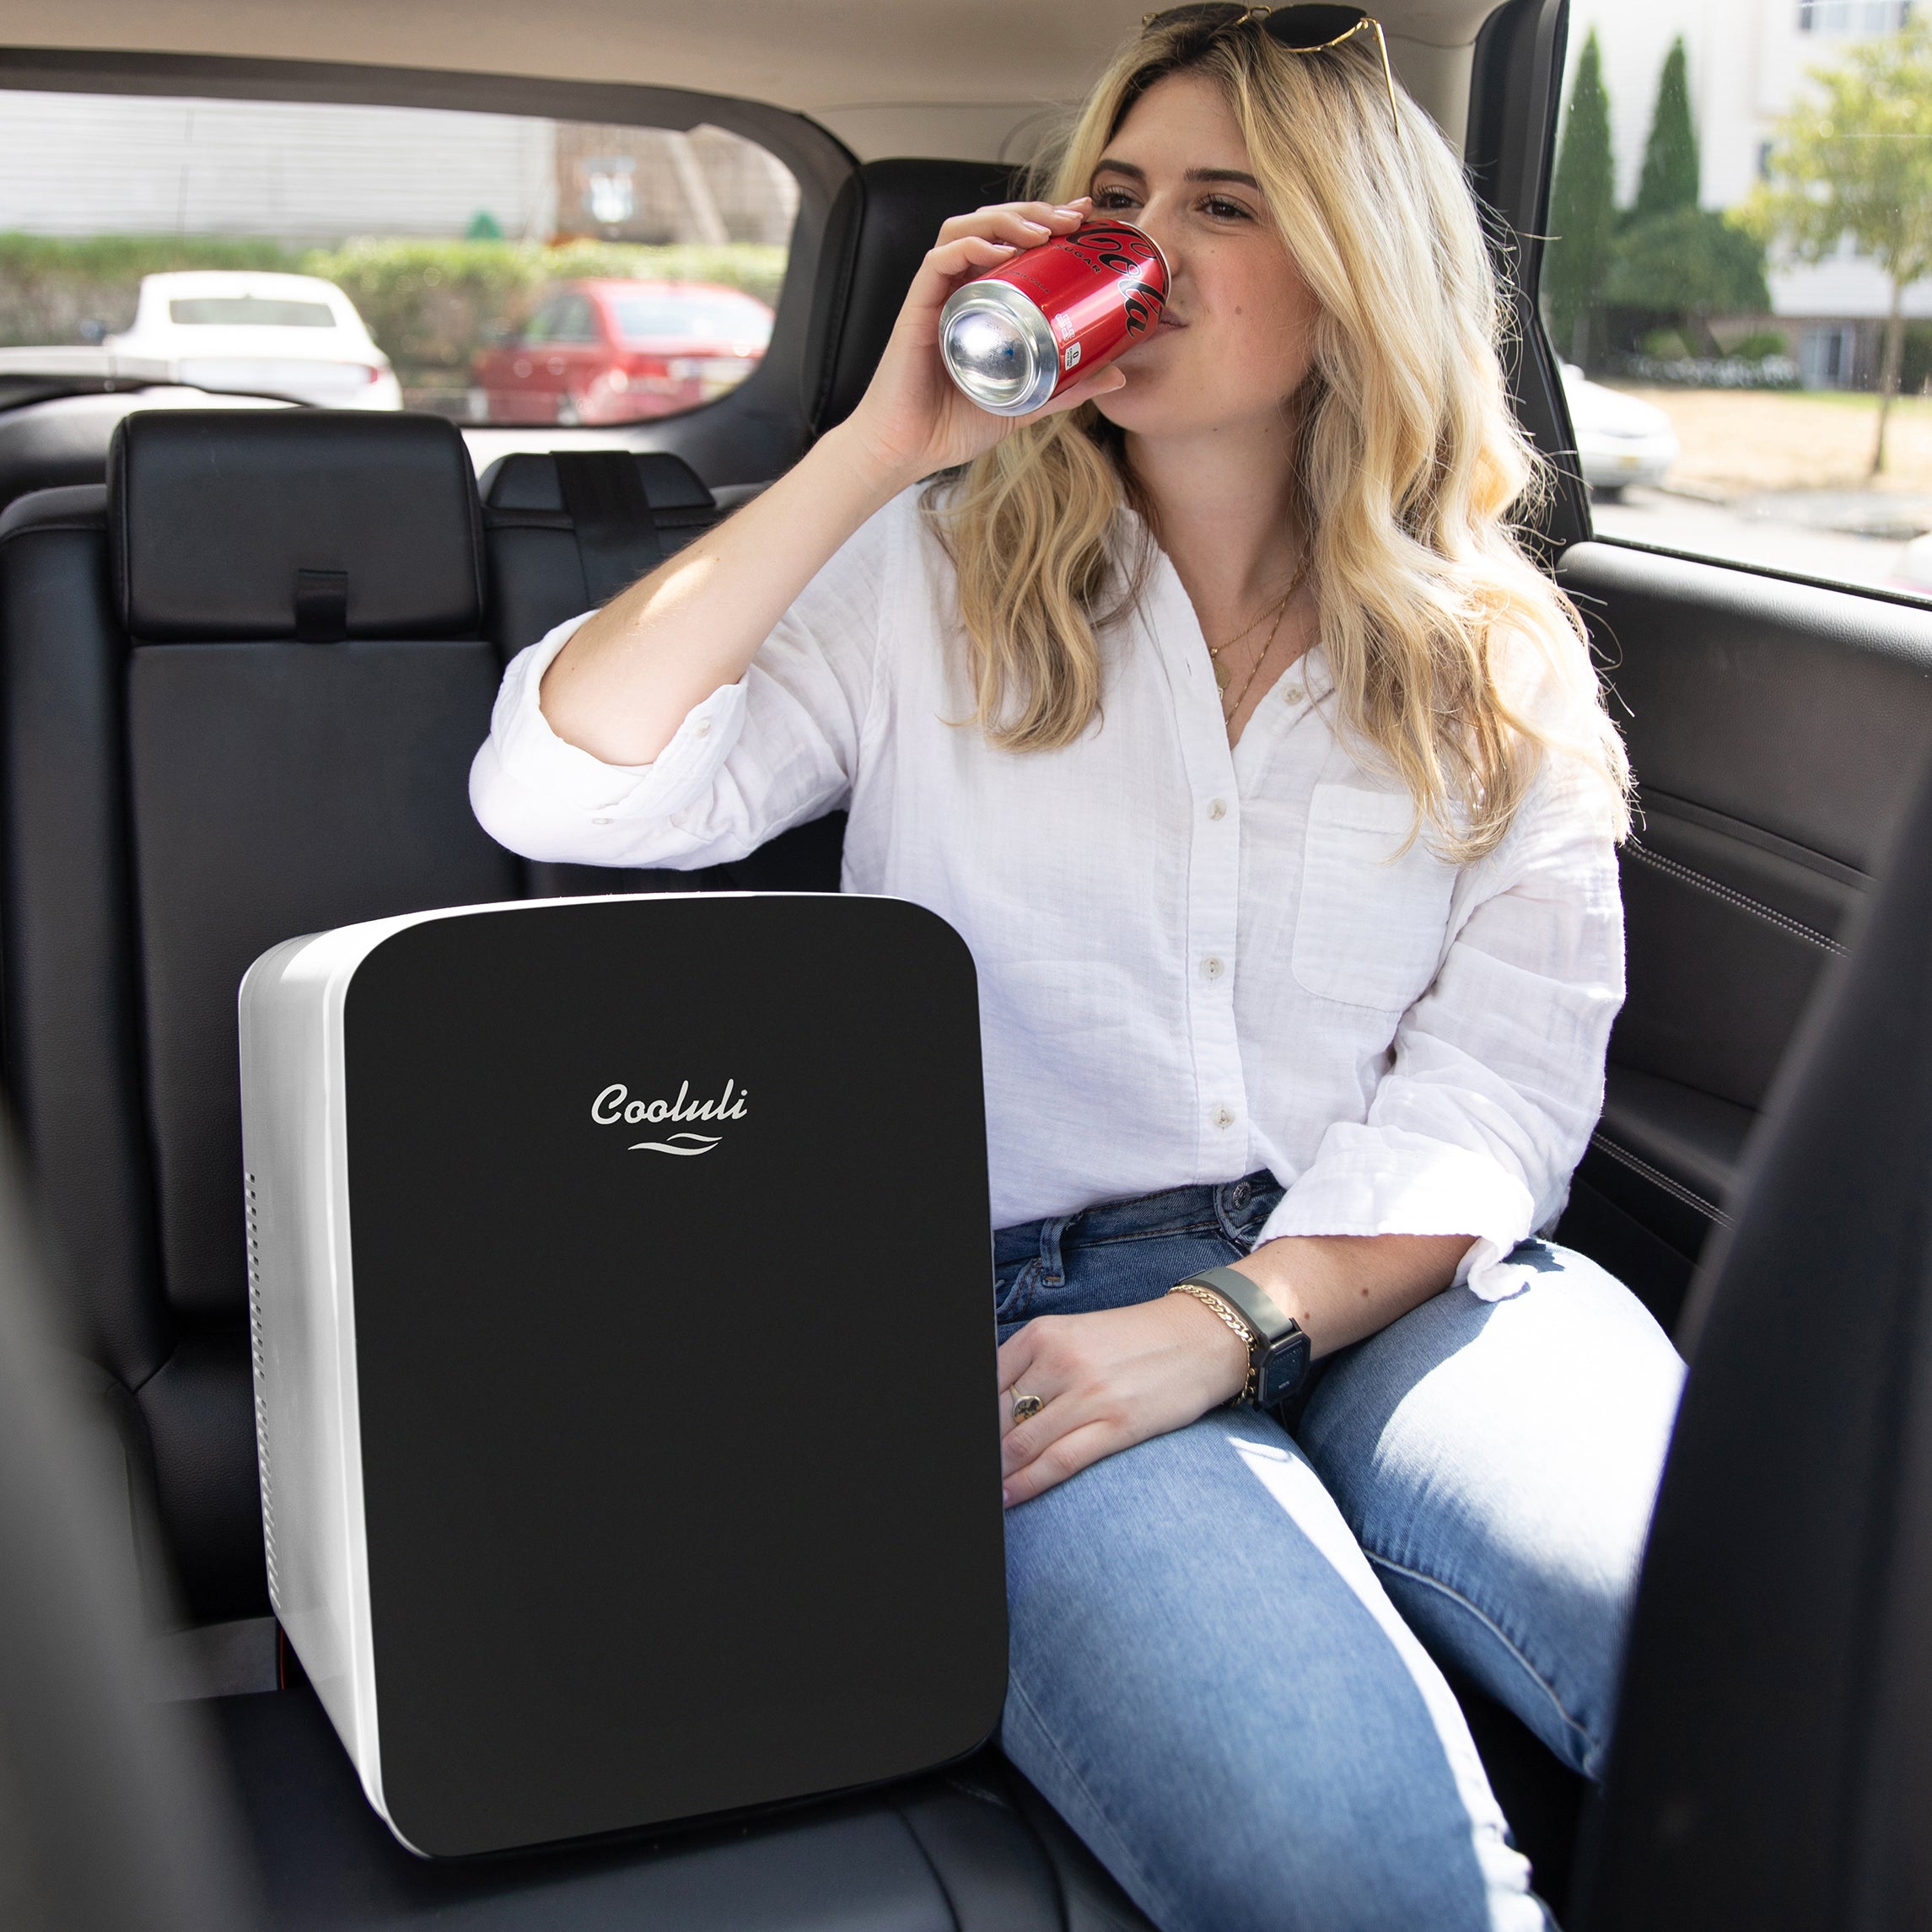  Cooluli Vibe Mini Fridge for Bedroom - With Cool Front Magnetic  Whiteboard - 15L Portable Small Refrigerator for Travel, Car & Office Desk  - Plug In Cooler & Warmer for Food